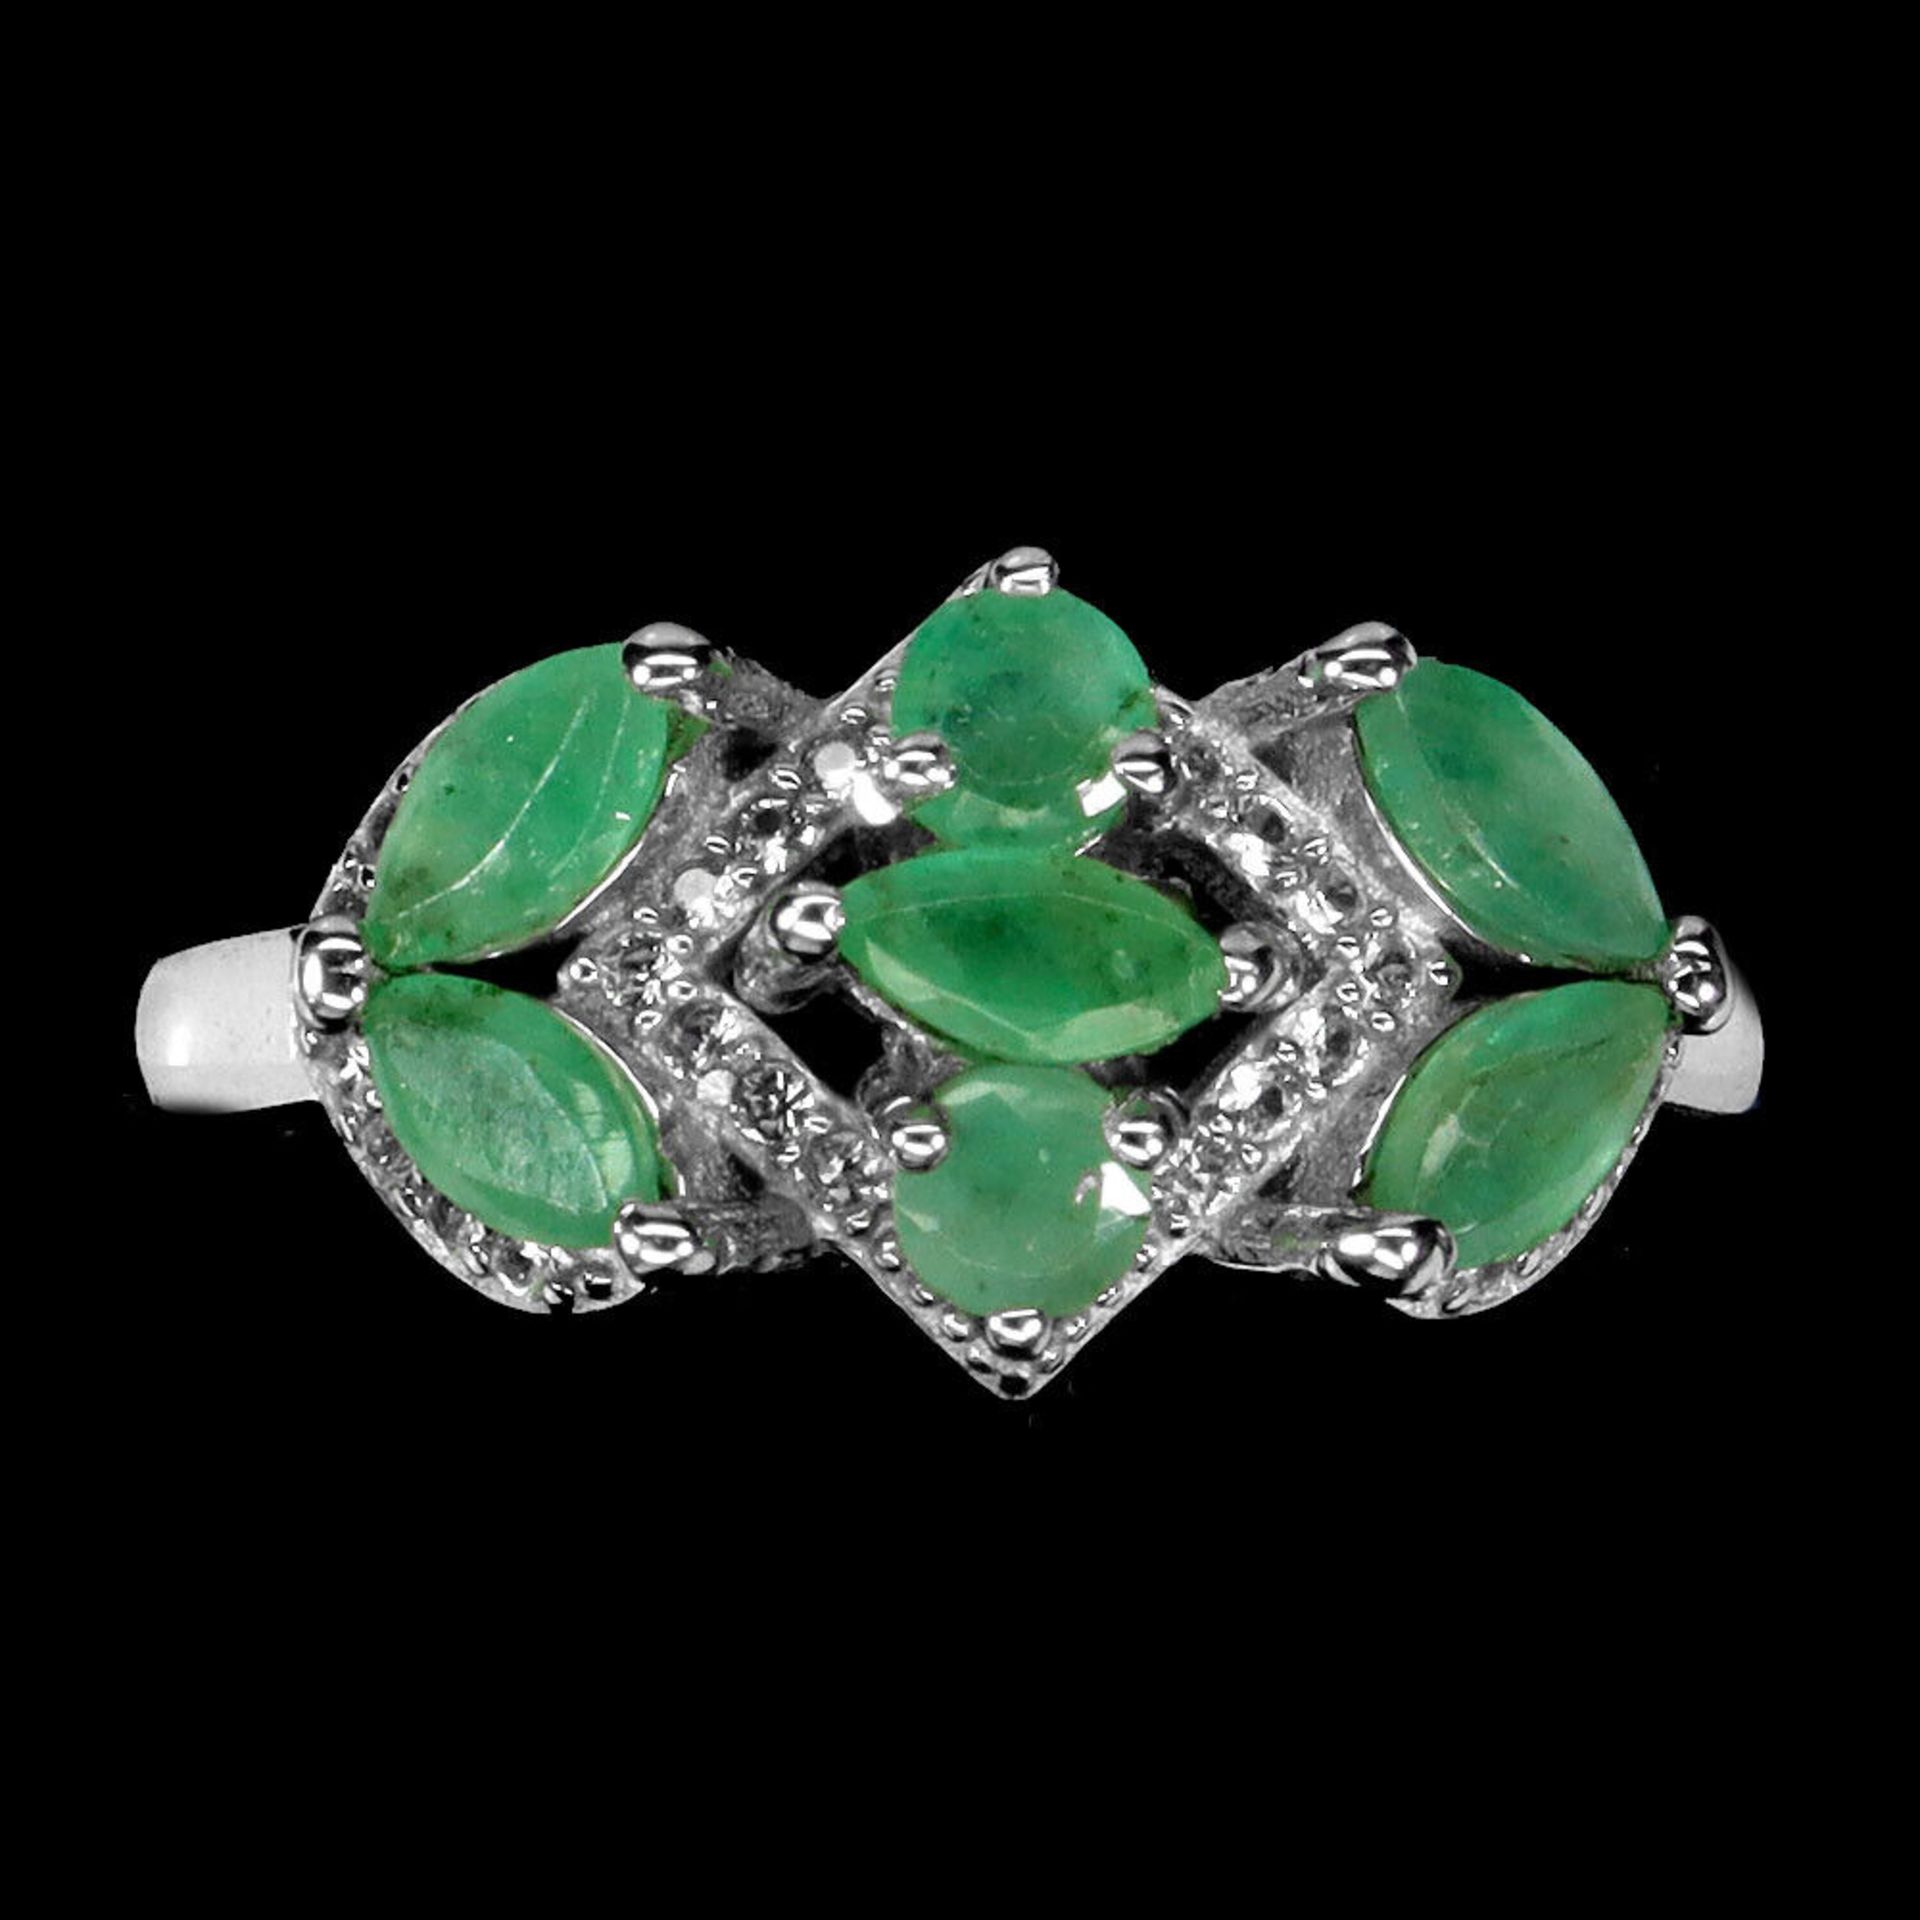 A matching 925 silver ring set with marquise cut emeralds and white stones, ring size N.